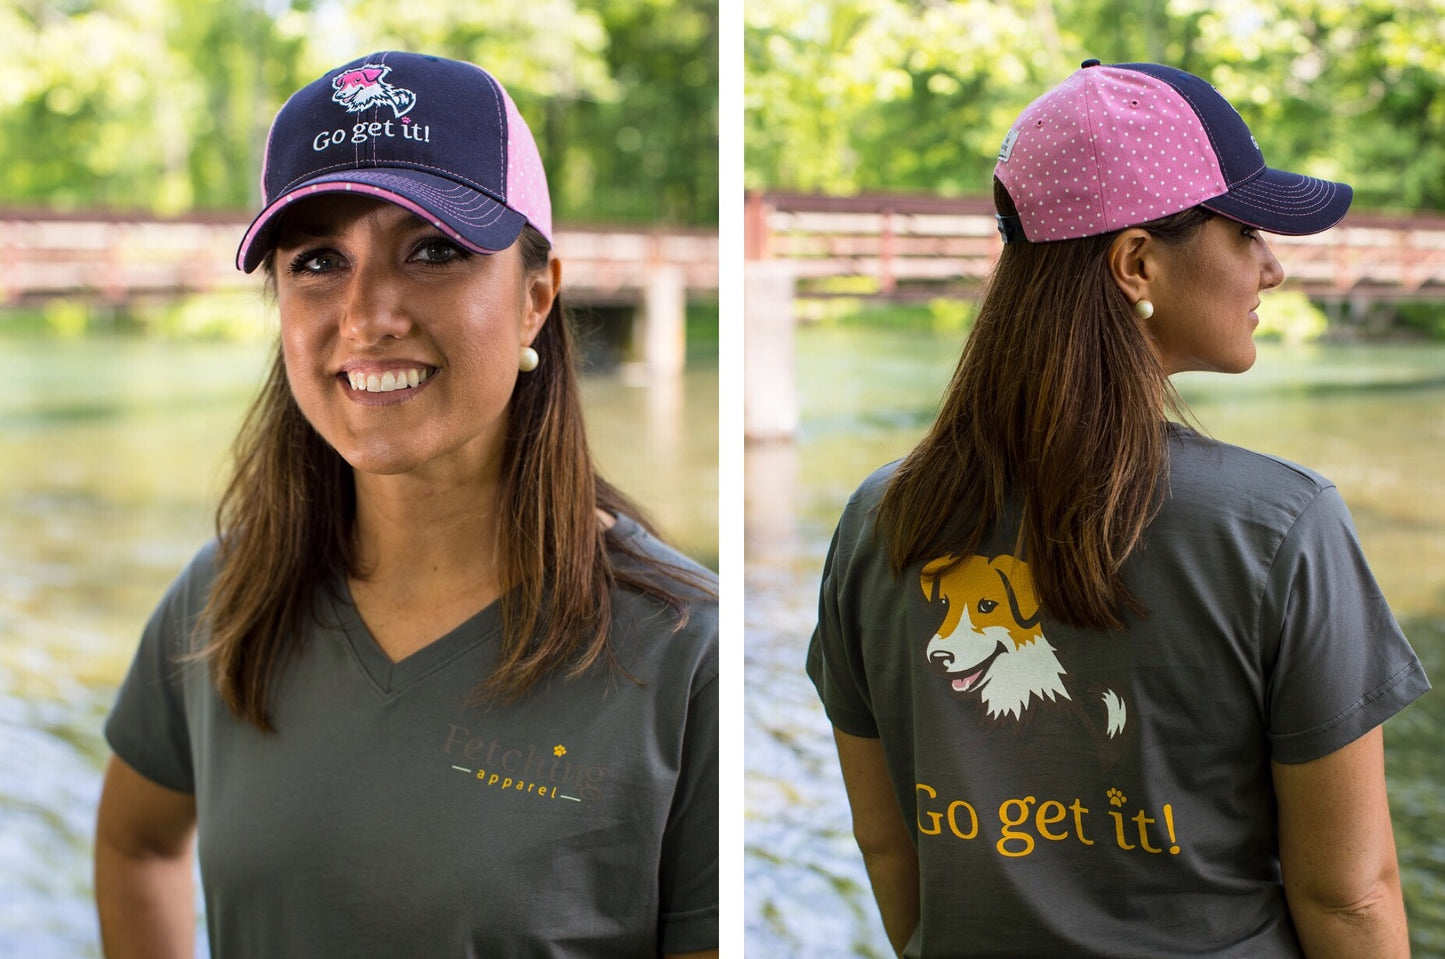 Fetching Apparel donates 40% of profits to animal rescues. Go get it!